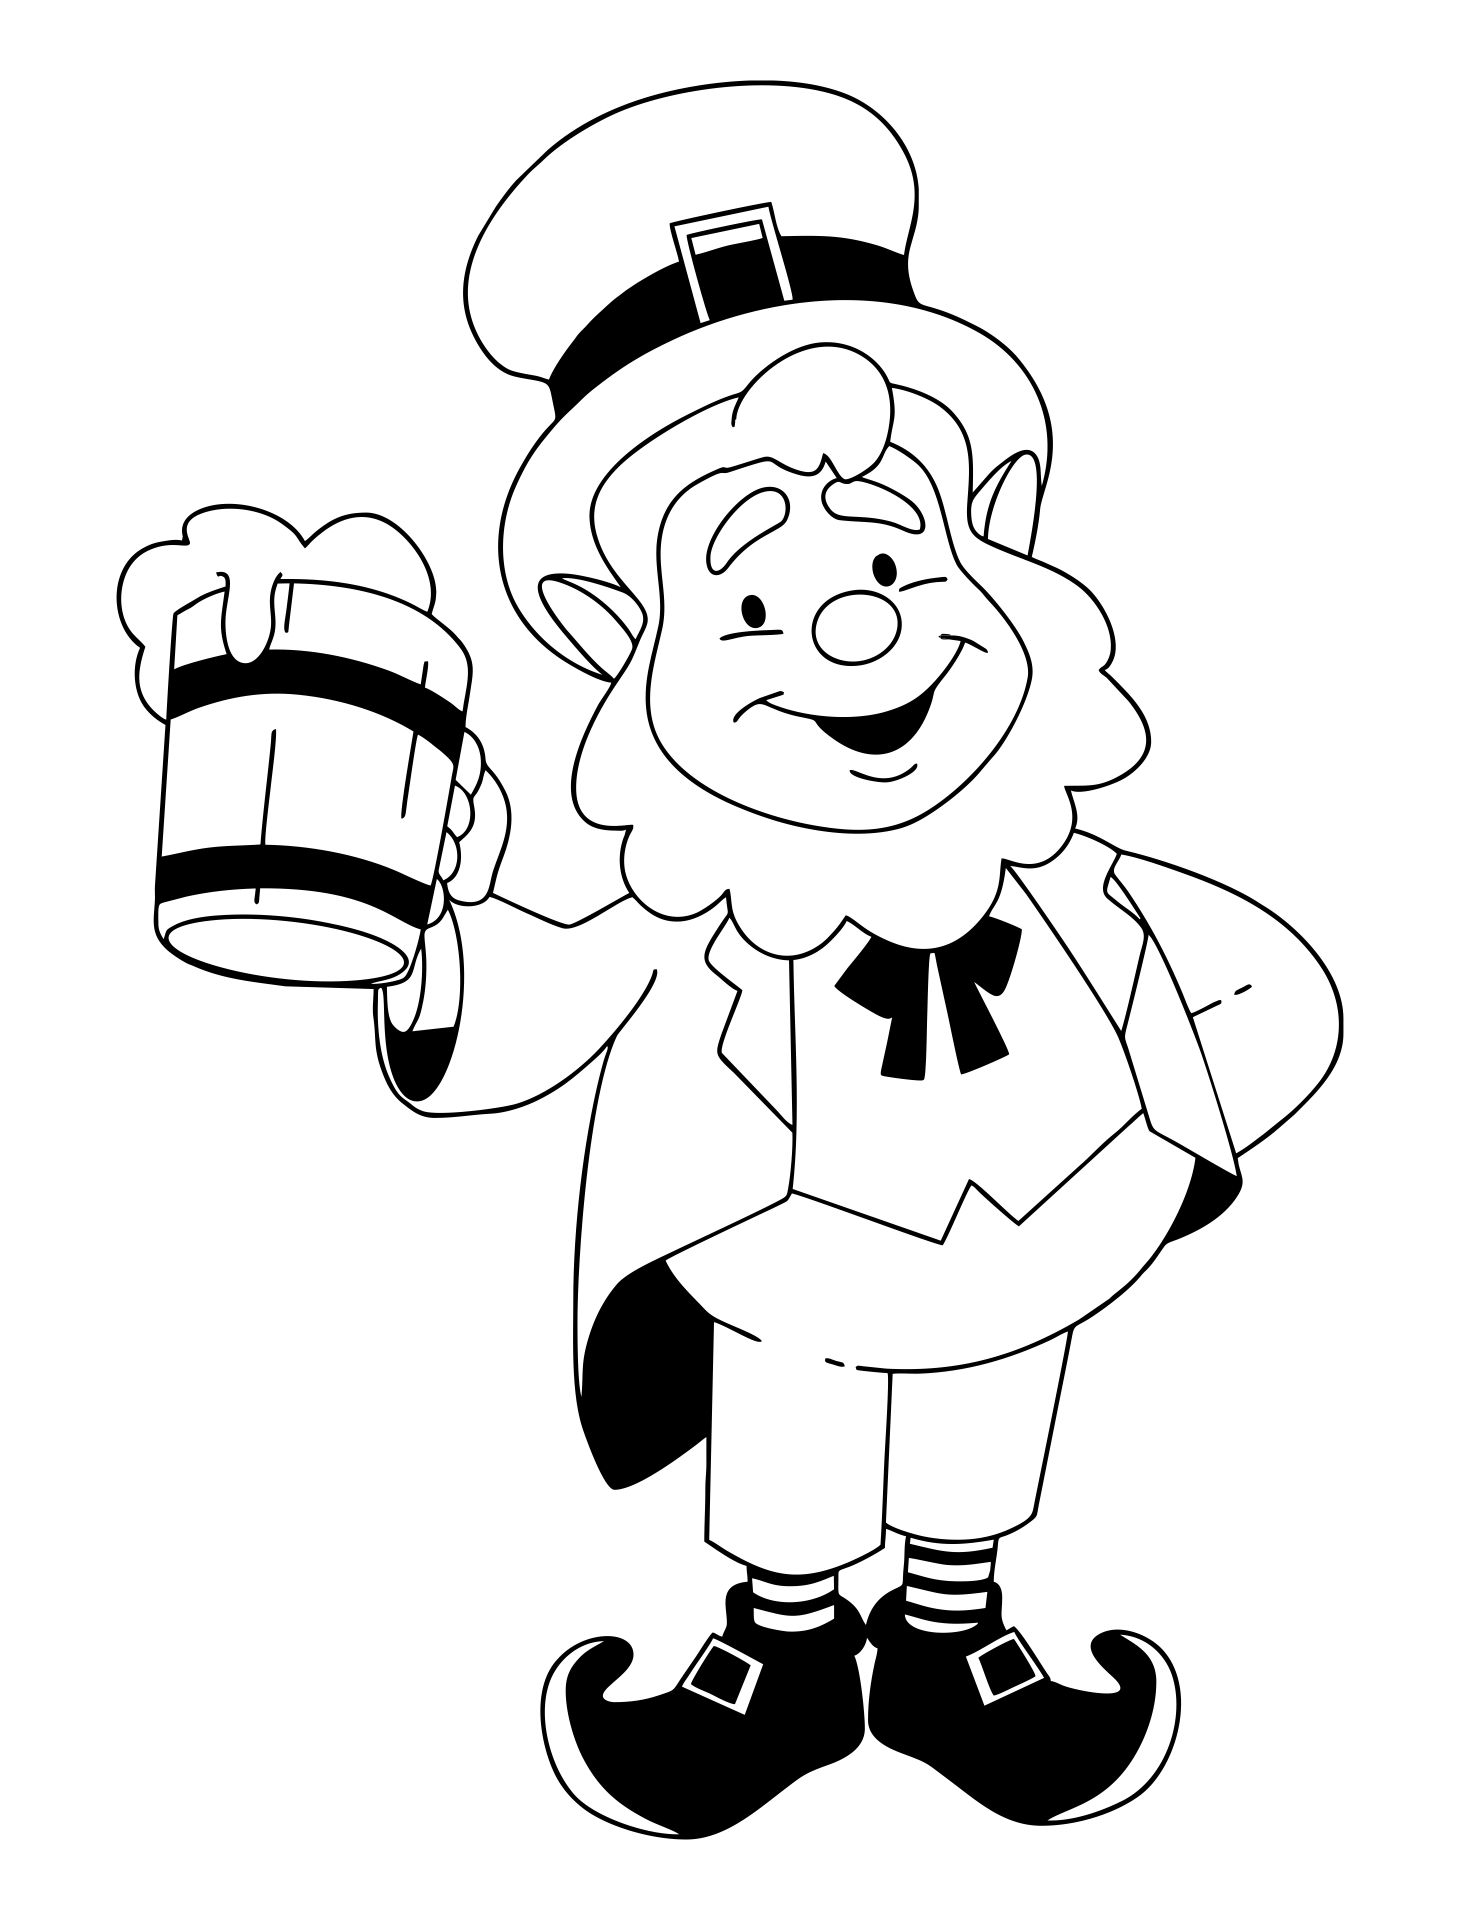 Printable Leprechaun Coloring Pages For Kids